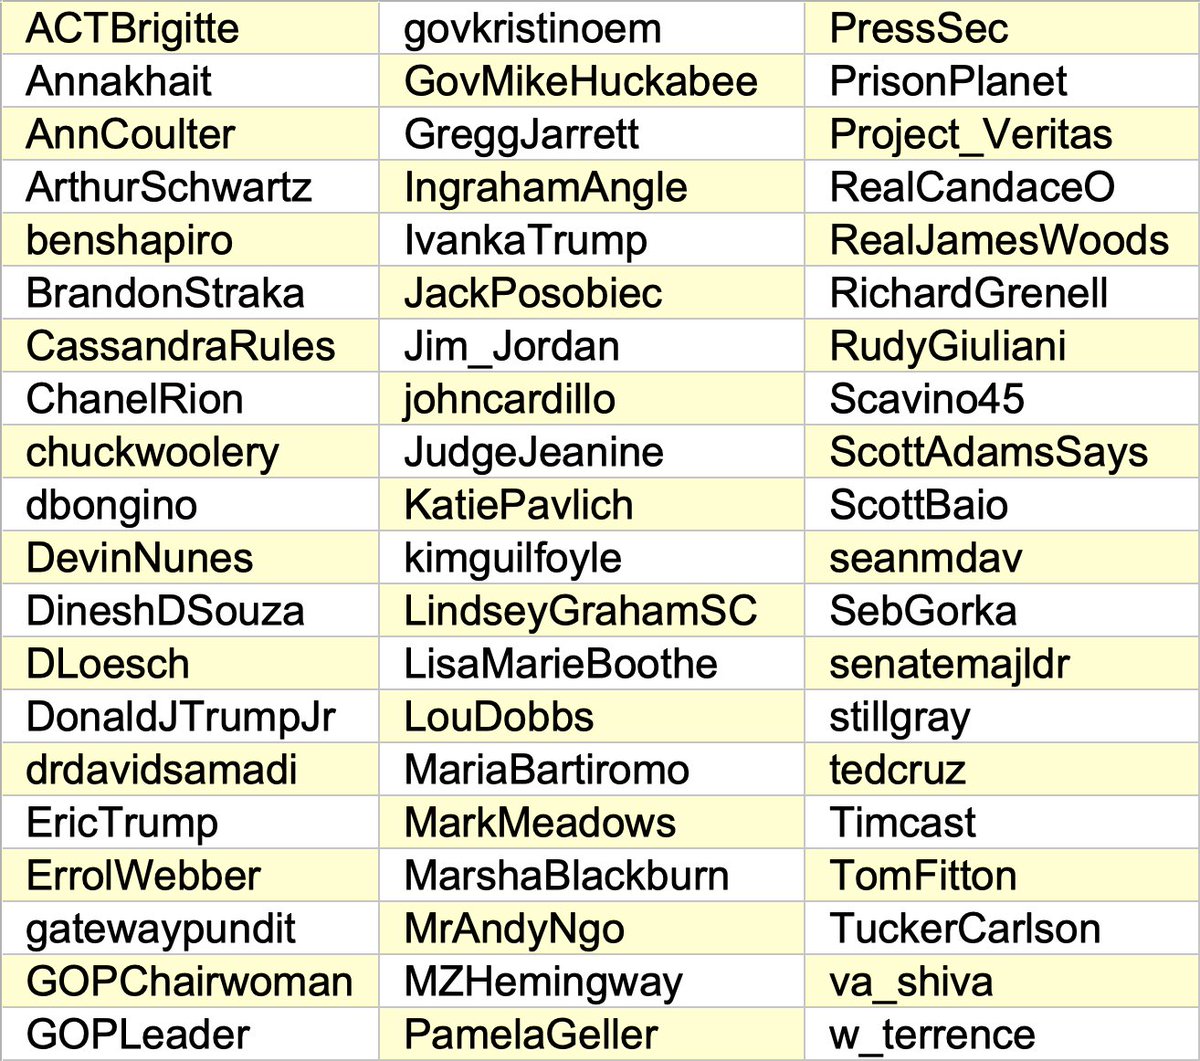 Just for fun, we started digging through the accounts followed by 60 popular verified  #MAGA accounts to see what there is to see. We found one weird thing that stuck out like a sore thumb (and will add more if/when we find more). . .cc:  @ZellaQuixote